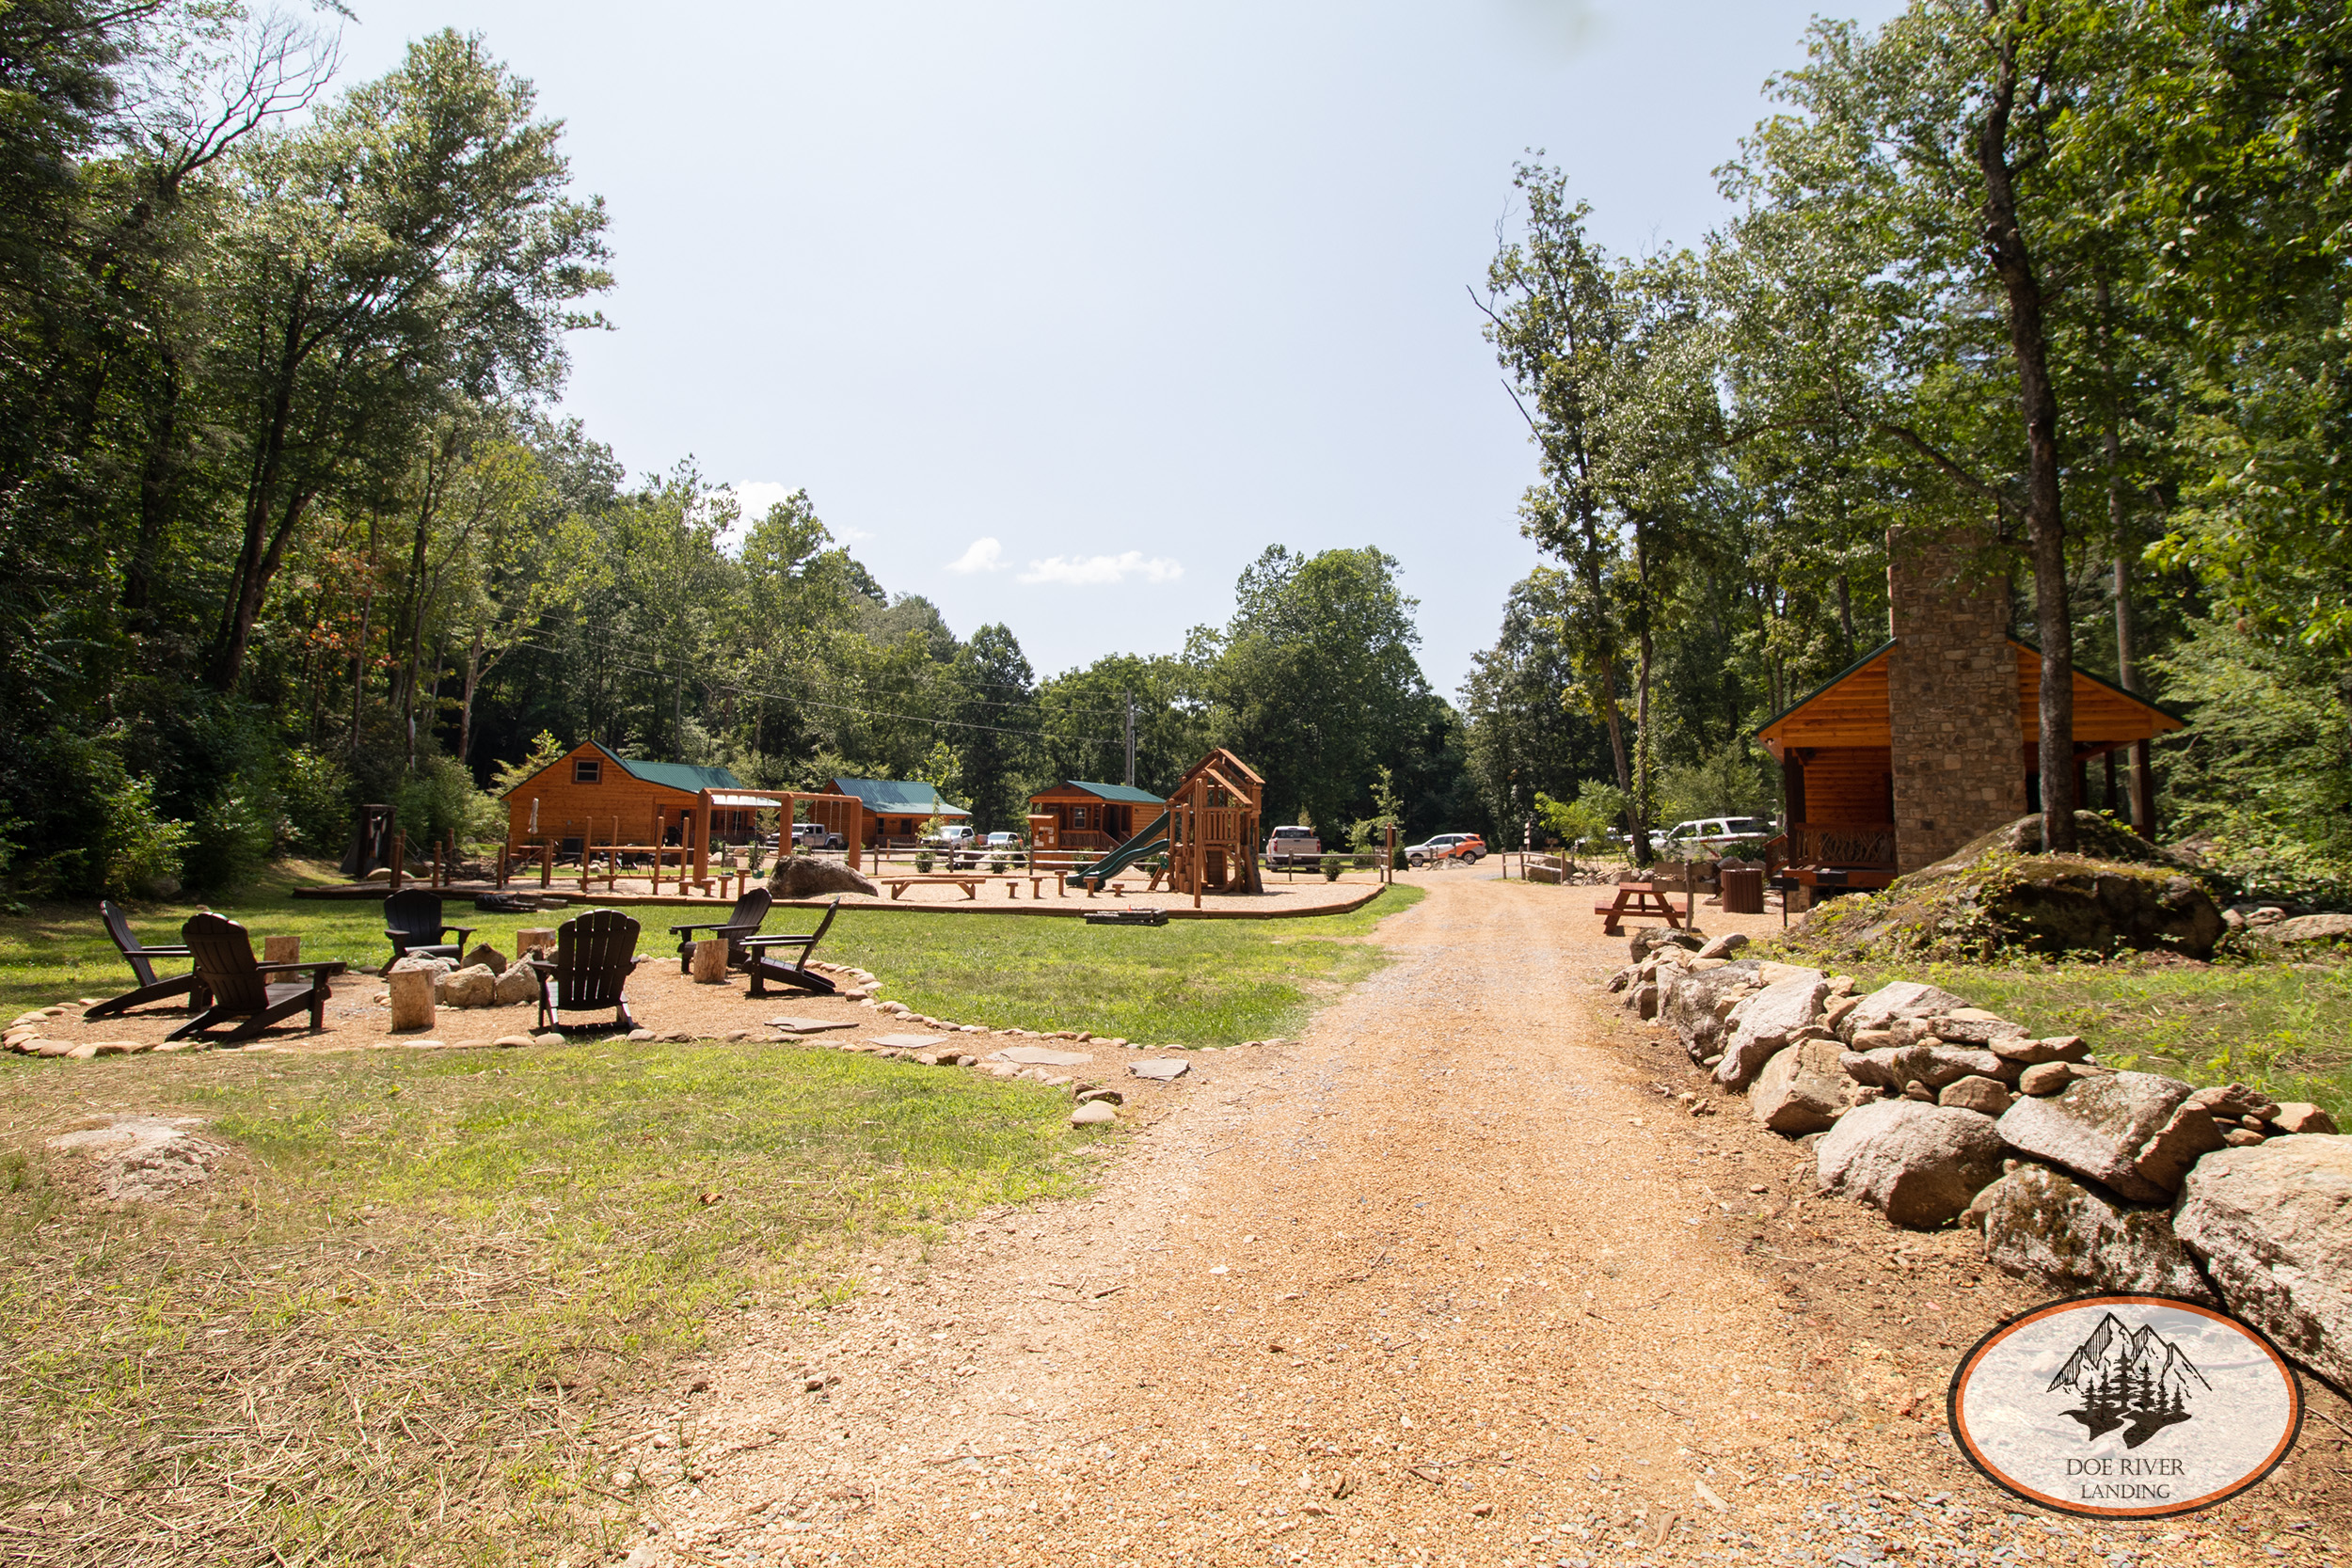 Doe River Landing campground and event venue in Roan Mountain, TN. Best vacation rental and event space near Elizabethton, TN and Johnson City TN. The campground features a playground, community fire pit, Toy Barn, bathhouse, games, activities, and more.